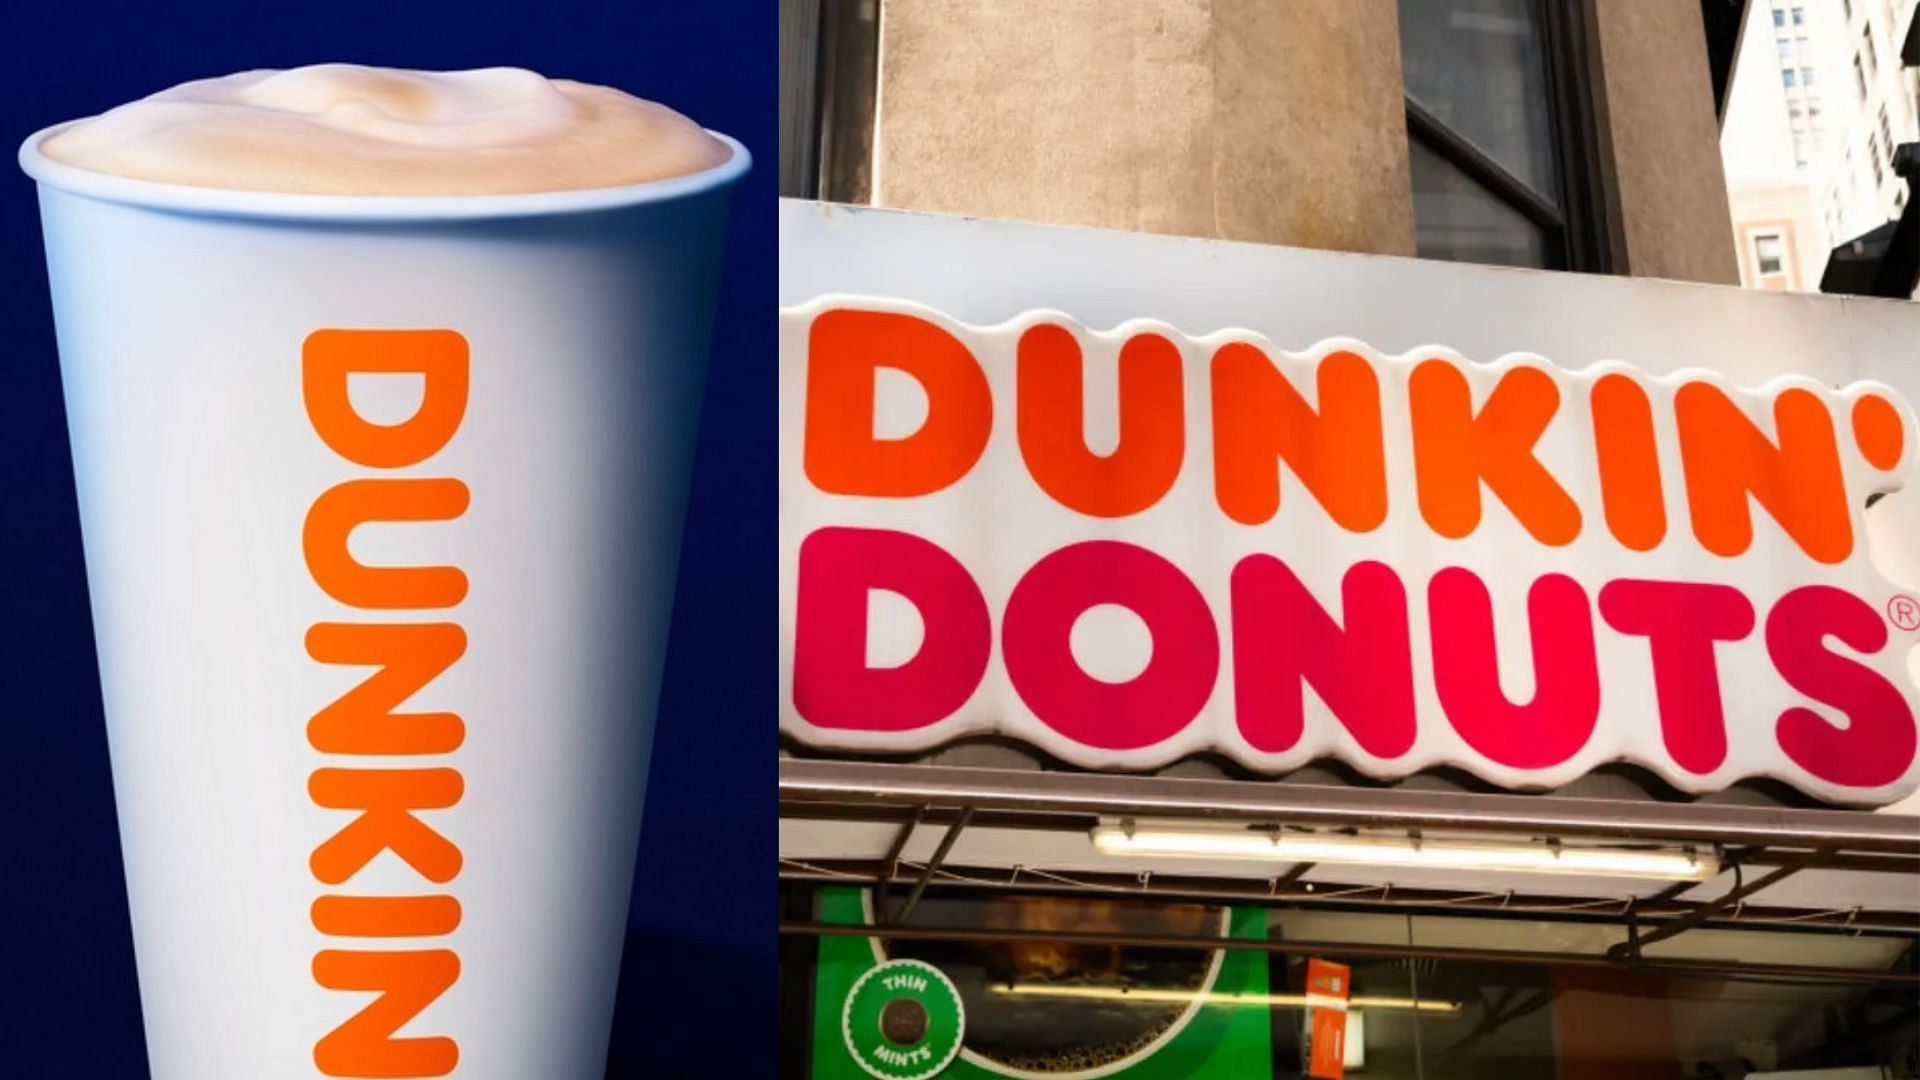 Dunkin&rsquo; Donuts debuts new Brown Butter Toffee Latte on its menu (Image via Alex Tai/SOPA Images/LightRocket/Getty Images)